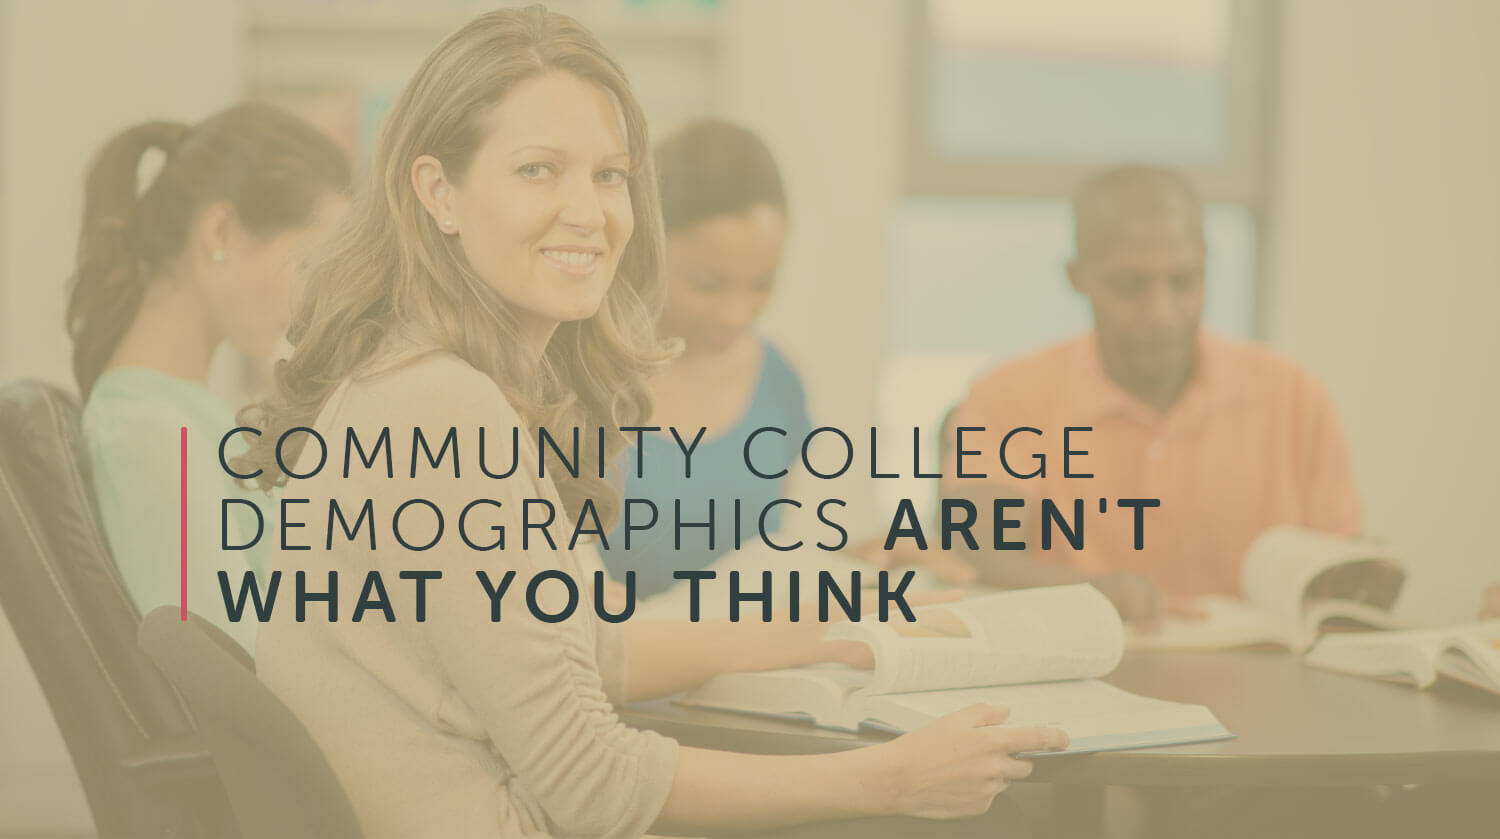 Community College Demographics Aren’t What You Think